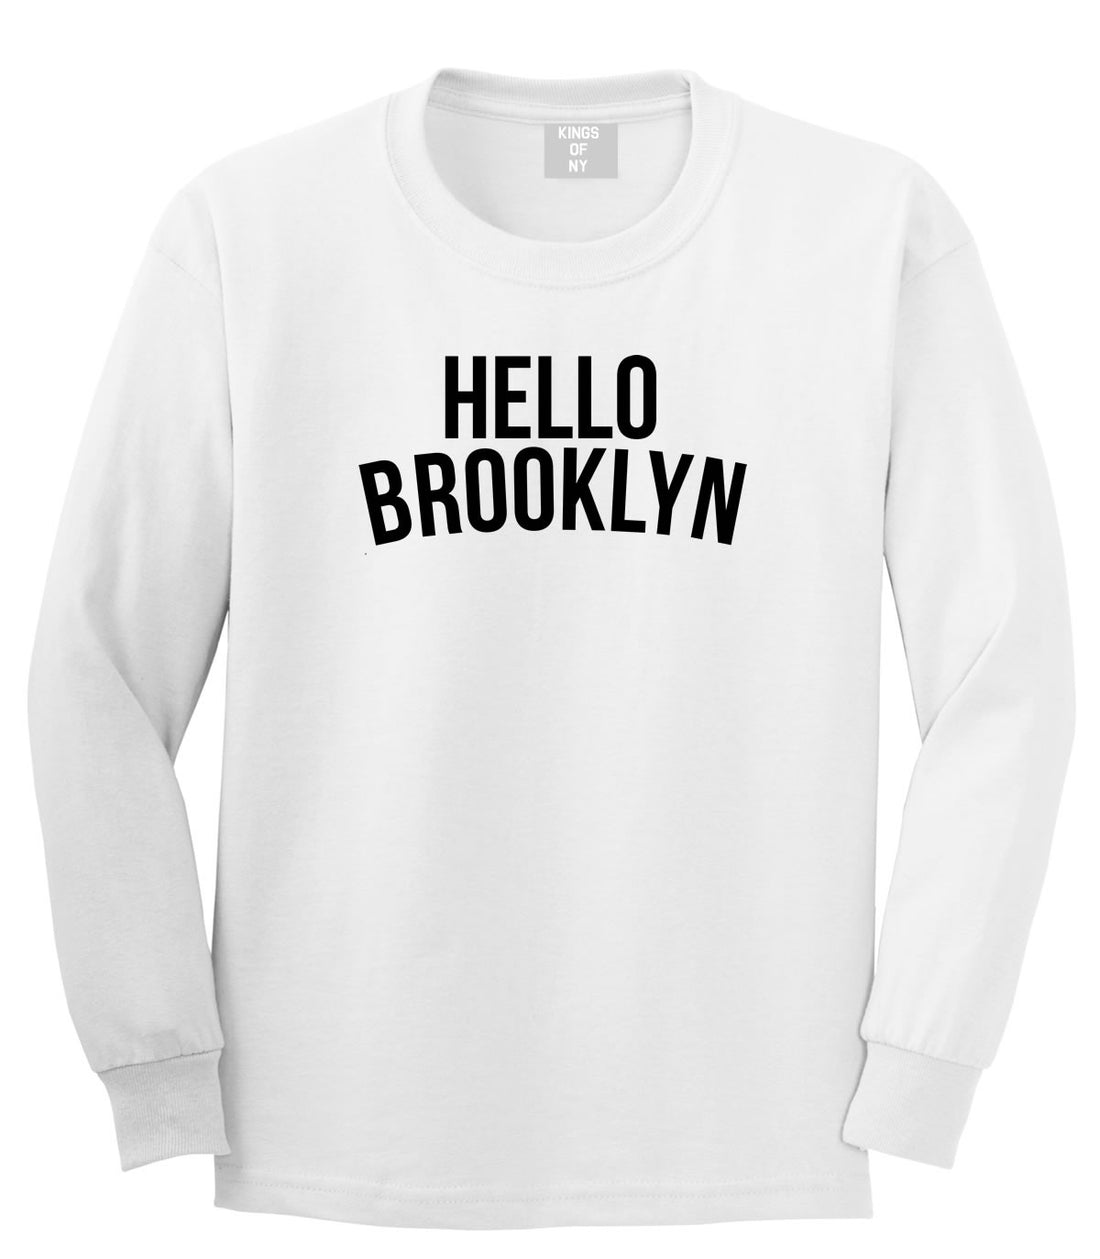 Hello Brooklyn Long Sleeve T-Shirt in White By Kings Of NY